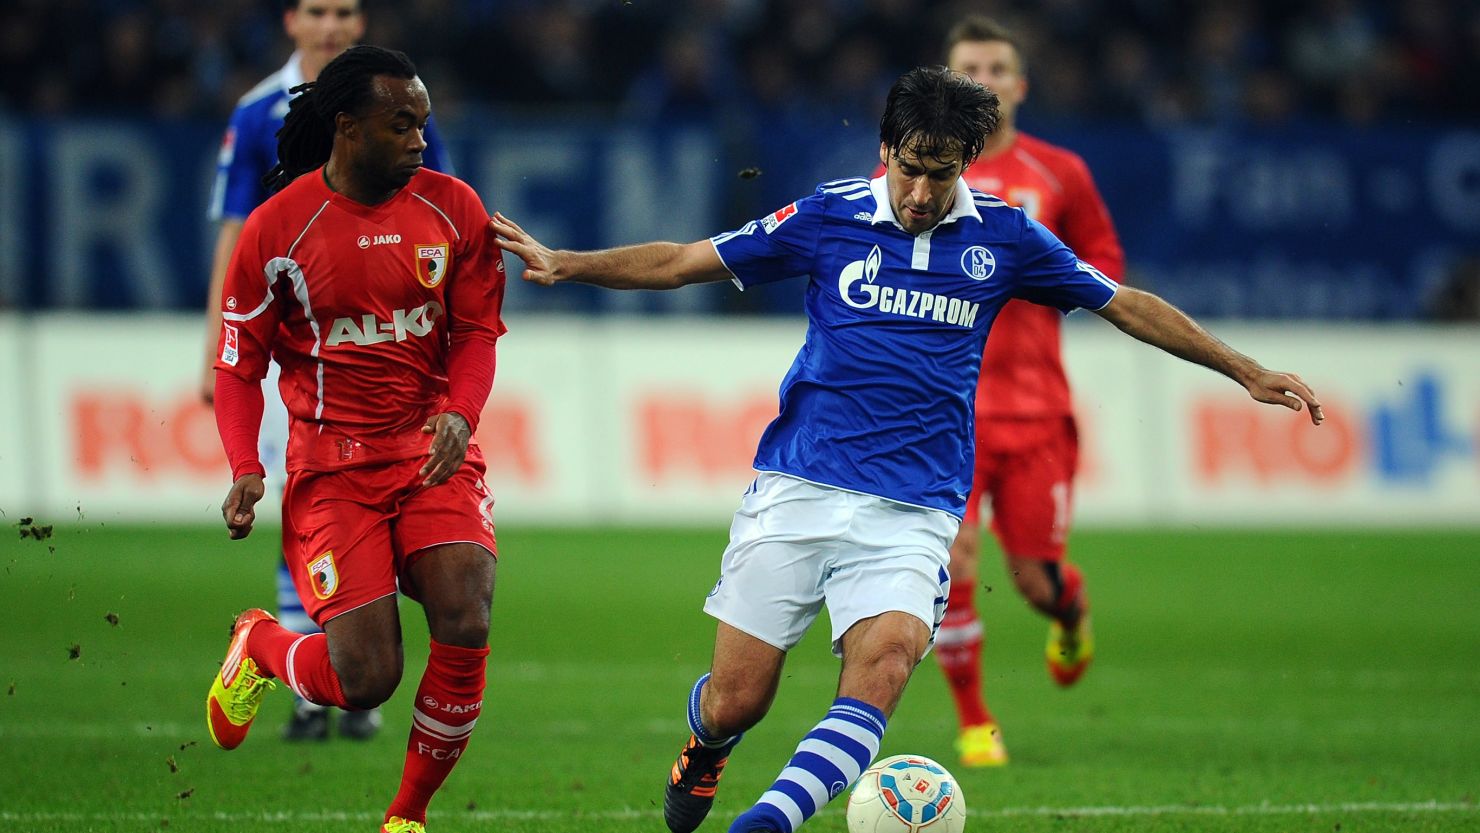 Veteran Spanish forward Raul Gonzalez (right) scored the third goal as Schalke moved up to fourth in the Bundesliga.